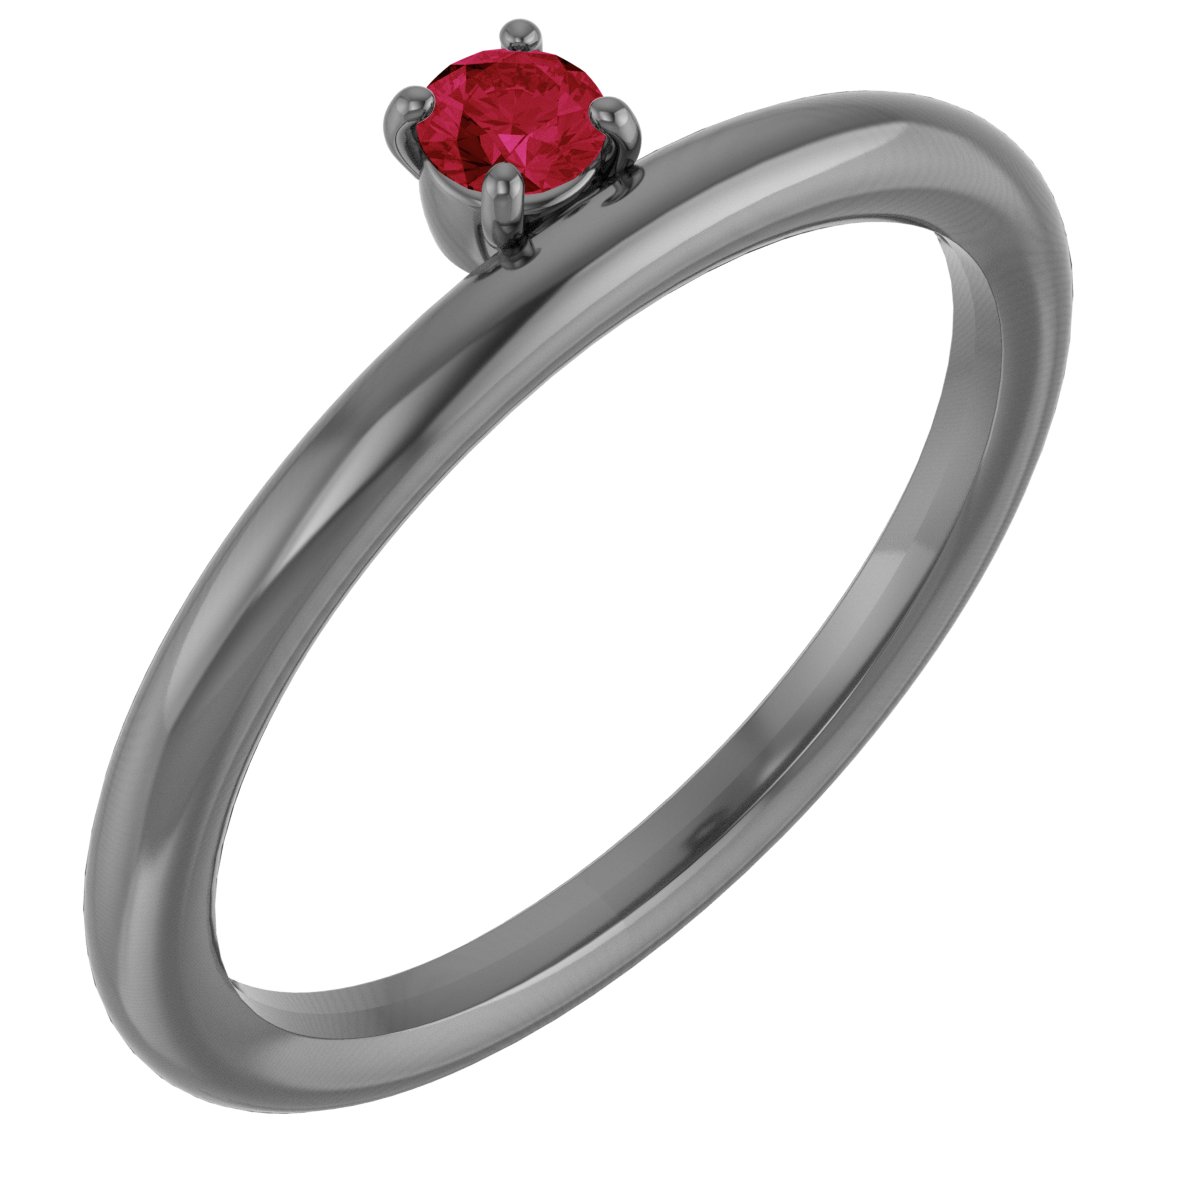 14K Yellow Chatham® Created Ruby Ring